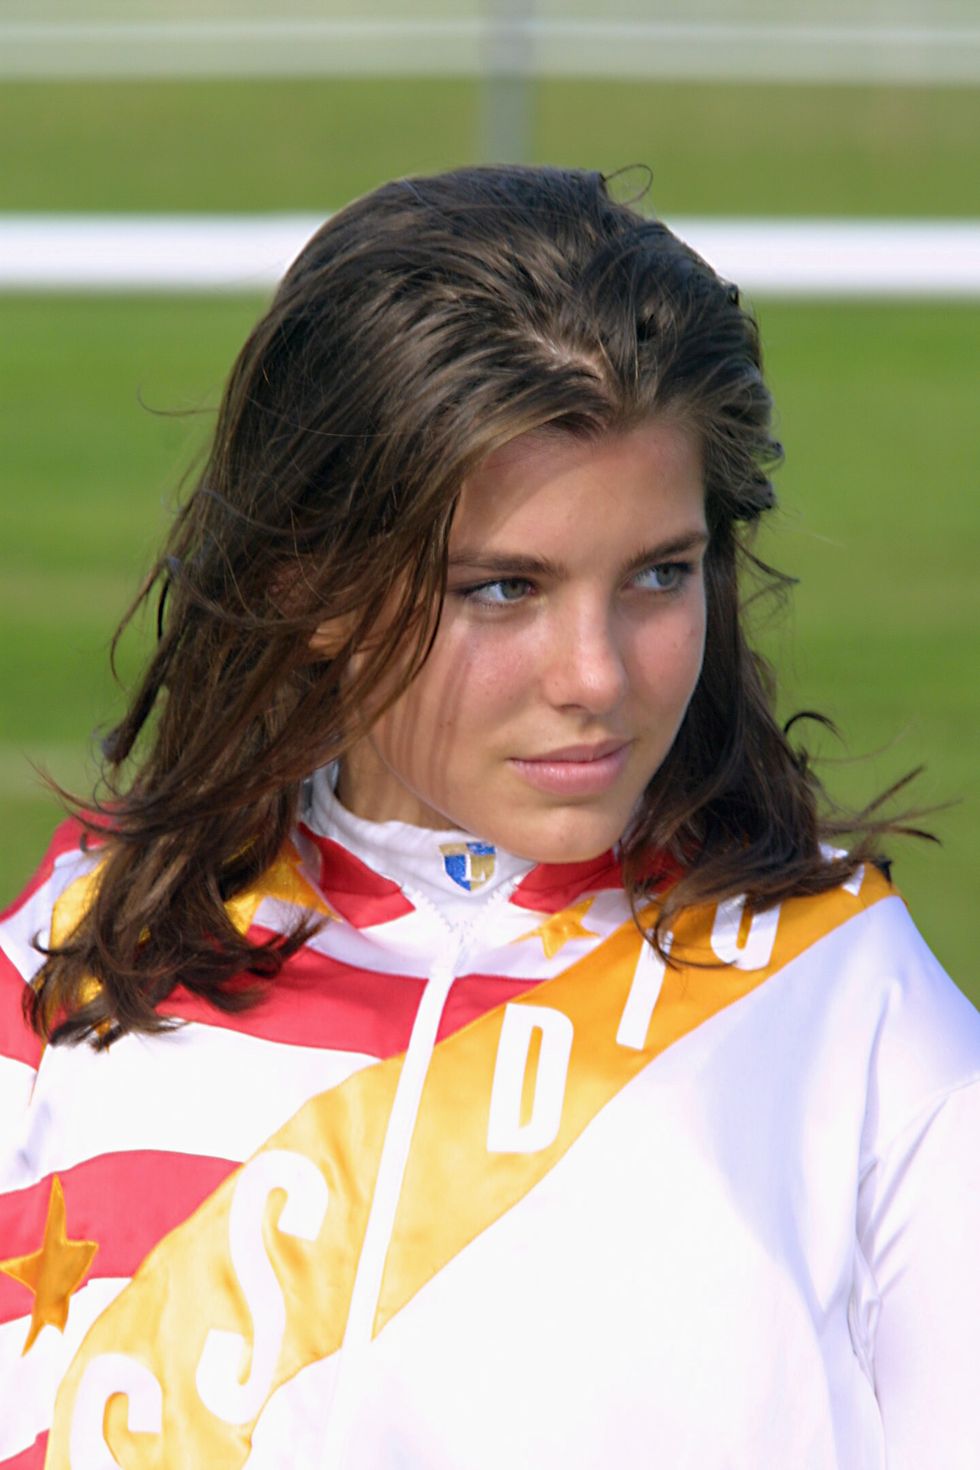 charlotte casiraghi wins 'the race'